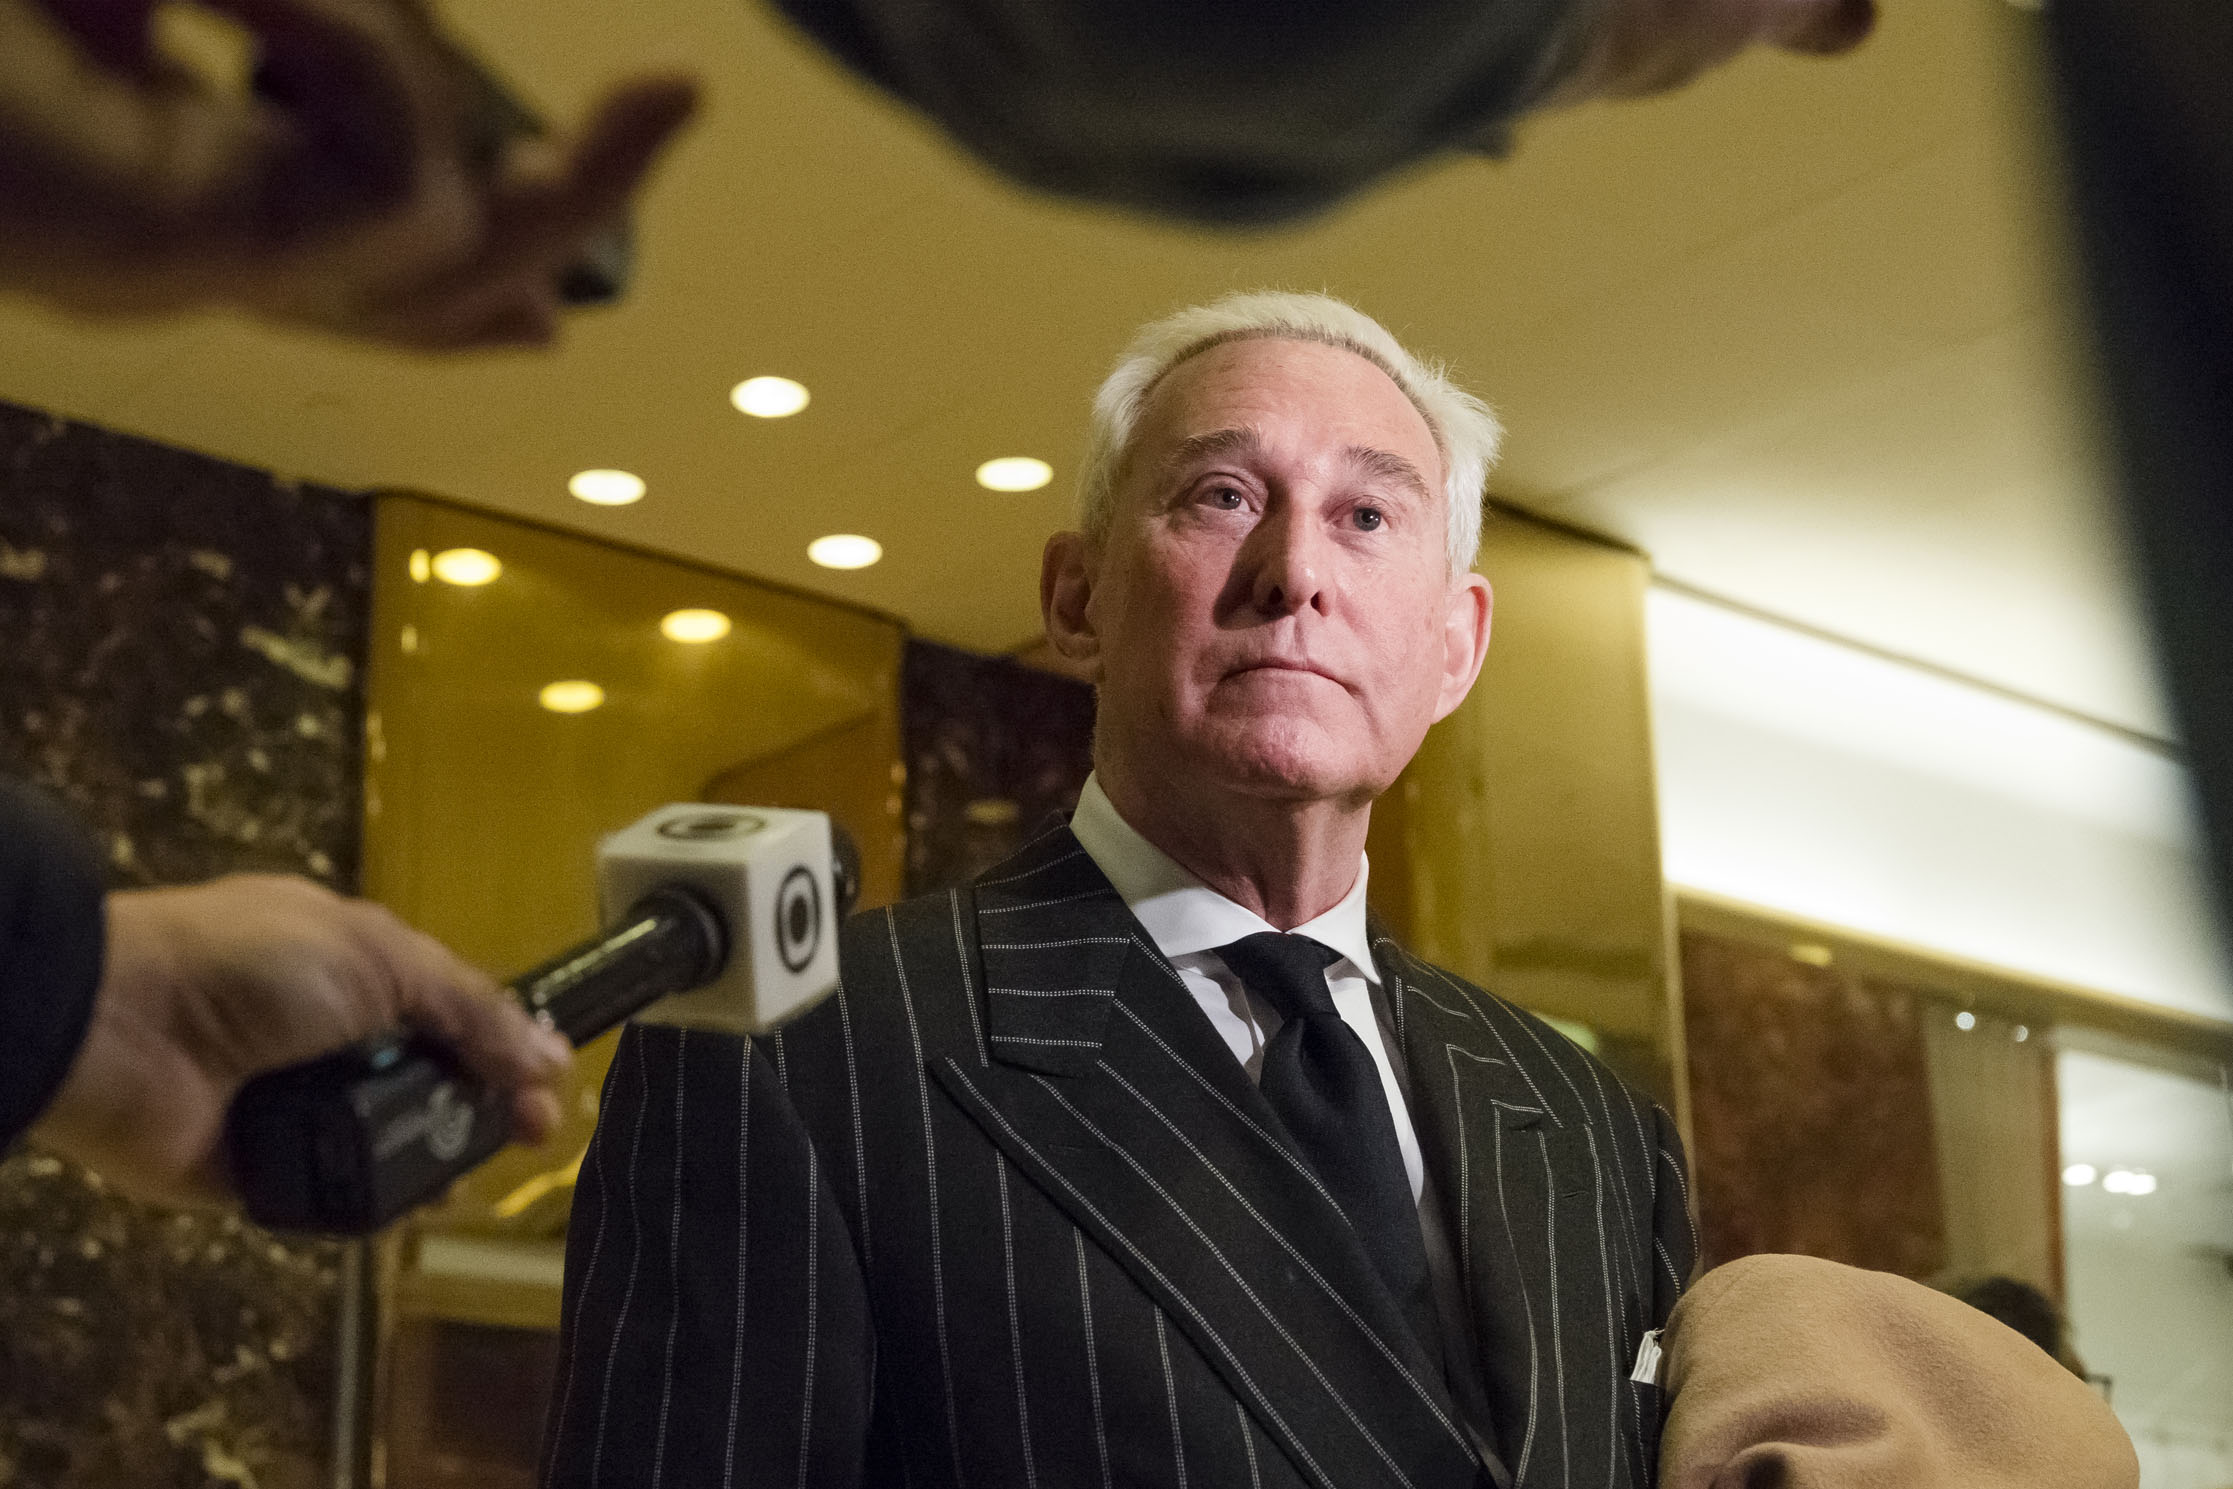 Conservative lobbyist and consultant Roger Stone speaks with the press in the lobby of Trump Tower in New York, New York, USA following a meeting there on December 6, 2016. Credit: Albin Lohr-Jones / Pool via CNP 
                      - NO WIRE SERVICE - Photo by: Albin Lohr-Jones/picture-alliance/dpa/AP Images (Albin Lohr-Jones—Albin Lohr-Jones/picture-allianc)